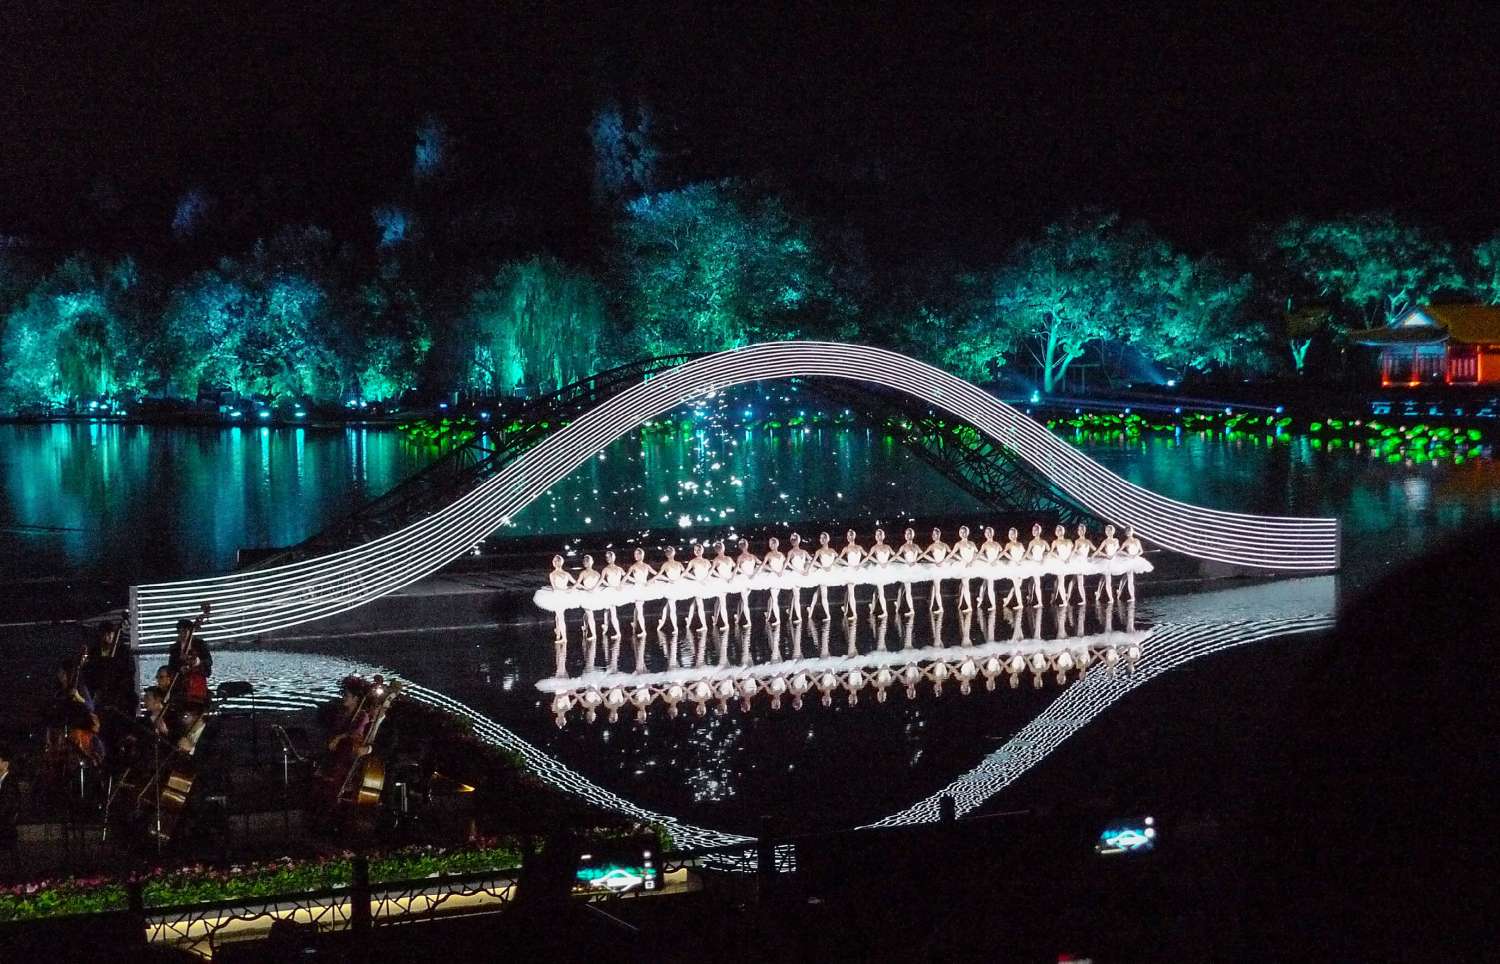 The stage was immersed just below the surface of the lake to give the illusion that the performers are floating on water